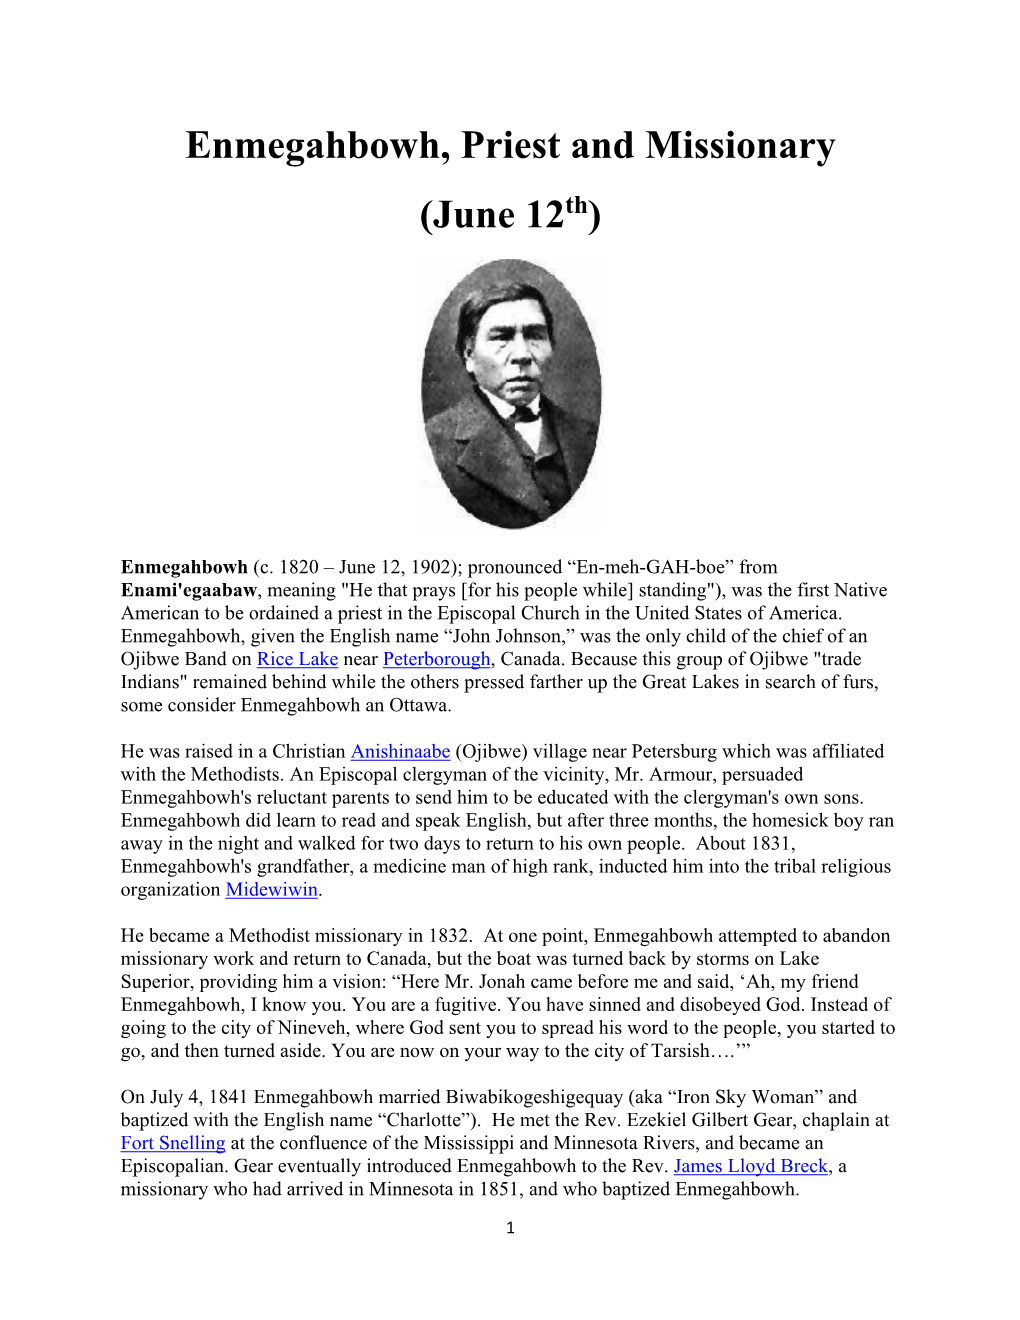 Enmegahbowh, Priest and Missionary (June 12Th)